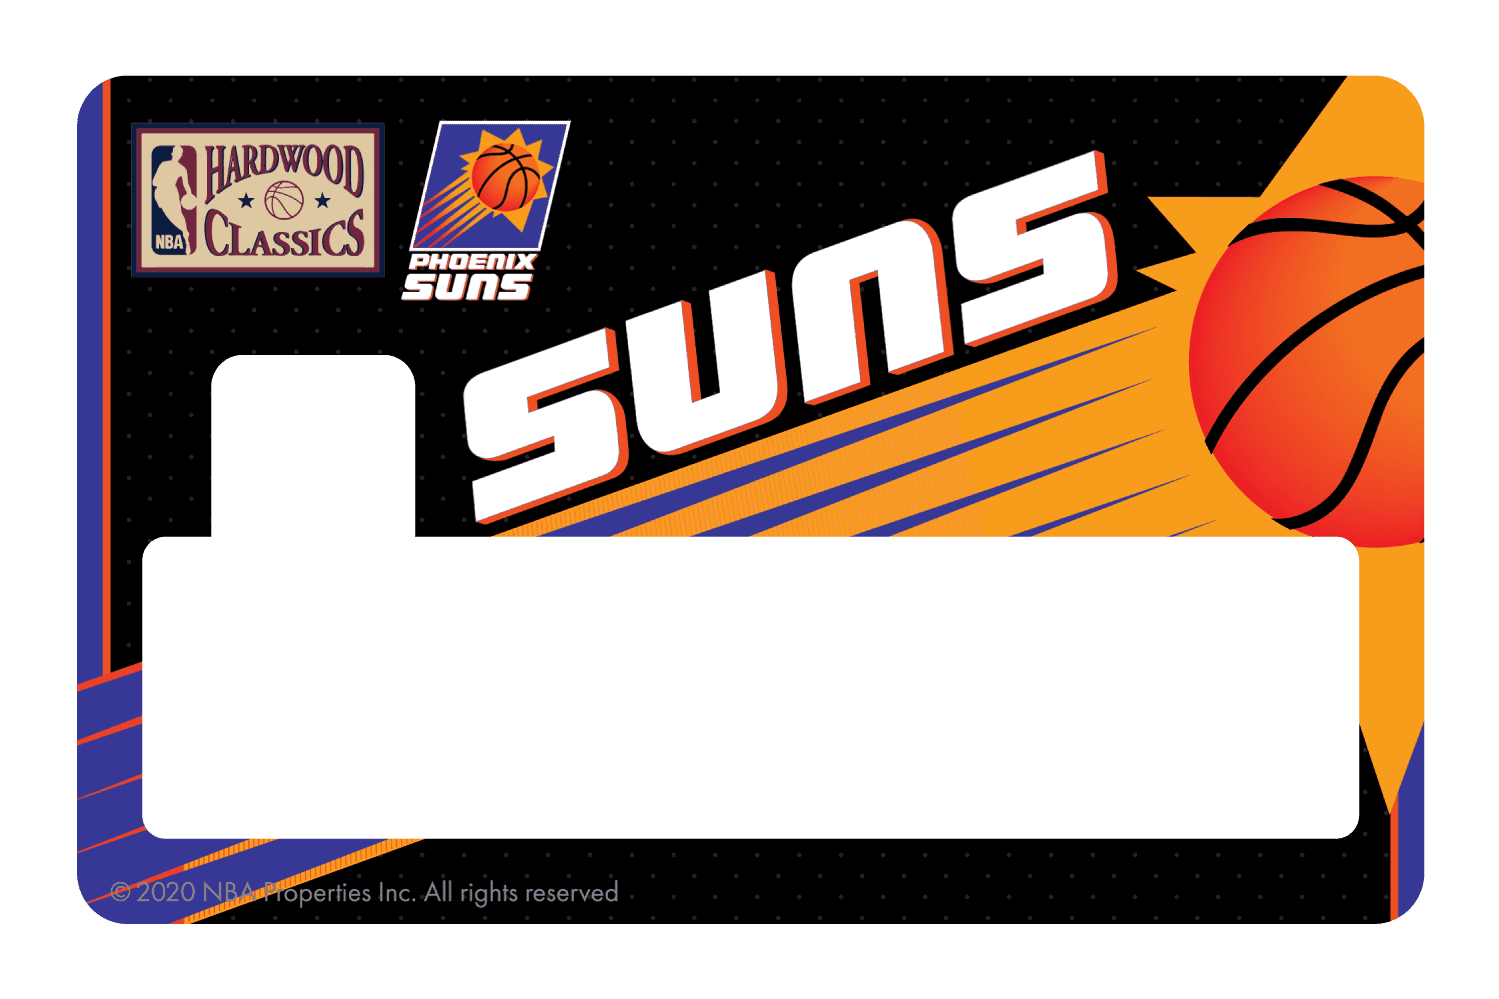 Credit Debit Card Skins | Cucu Covers - Customize Any Bank Card - Phoenix Suns: Devin Booker, Full Cover / Small Chip